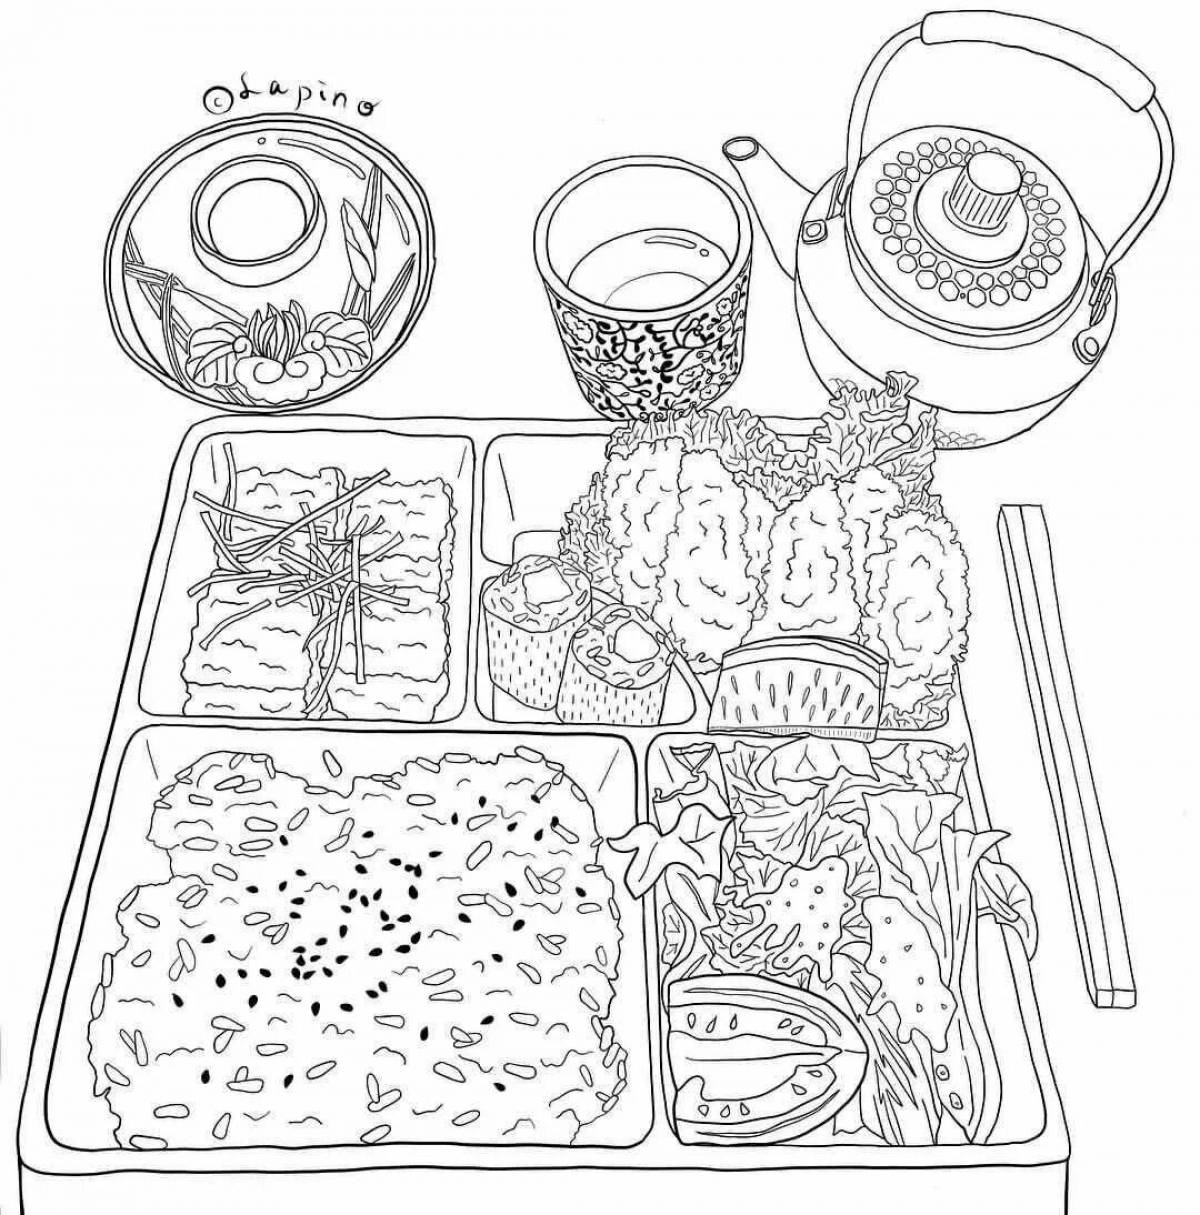 Coloring page savory national dishes